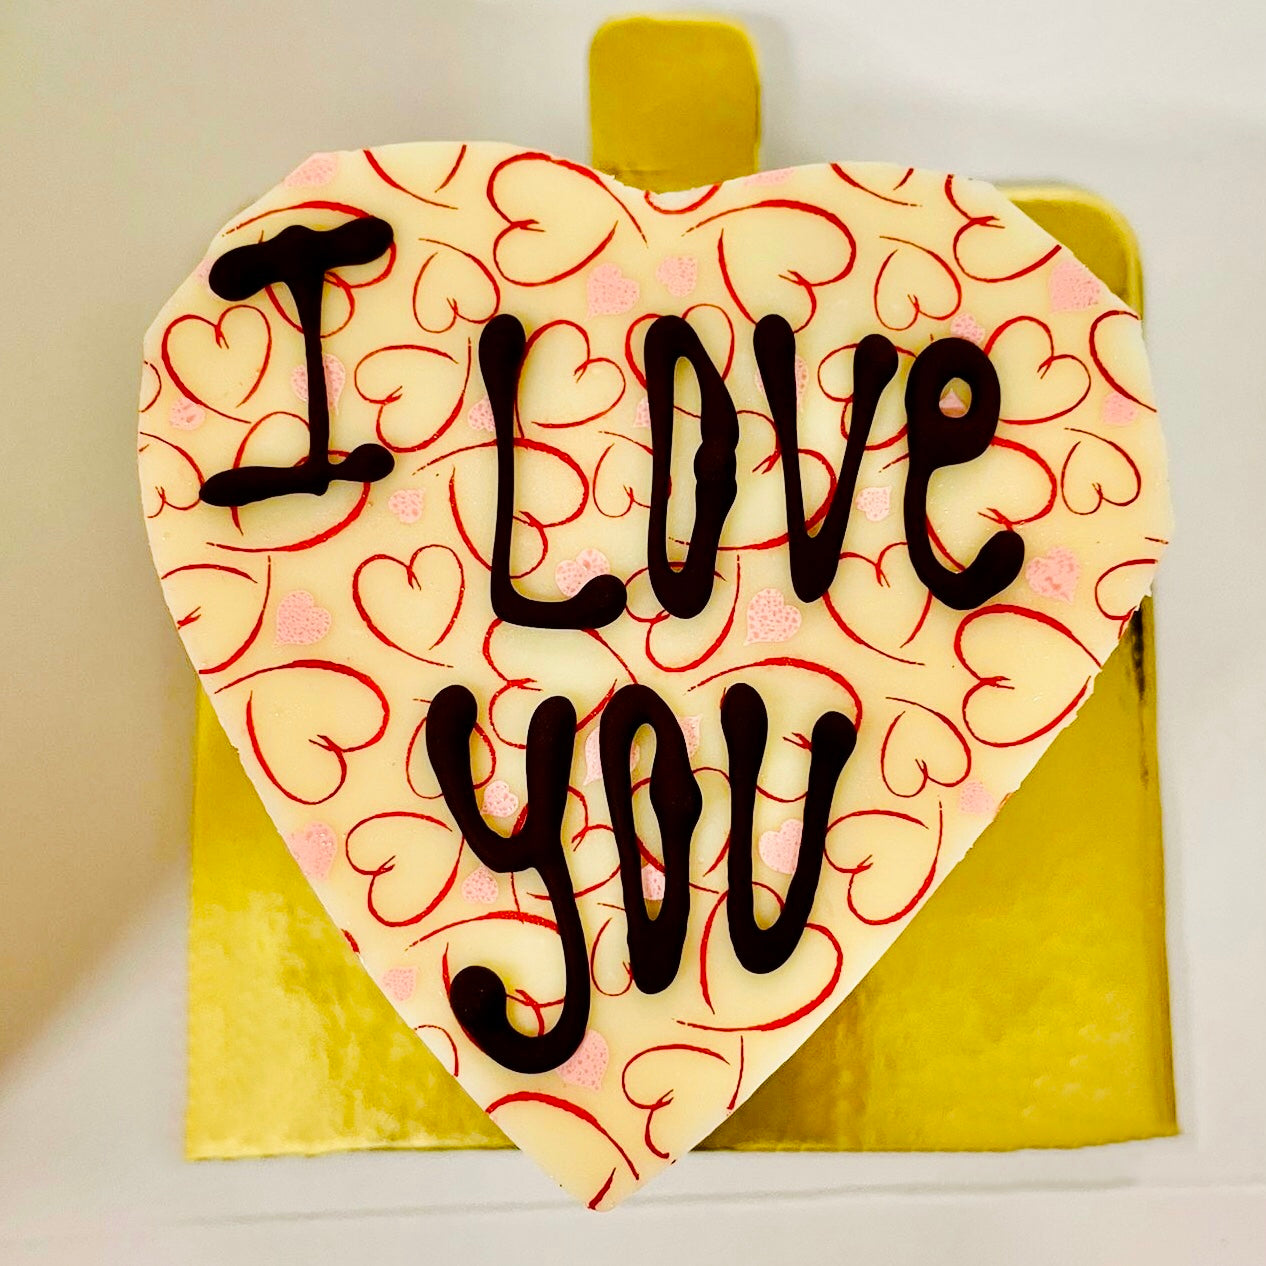 A brownie heart filled with chocolate buttercream and topped with white chocolate heart that says "I love you"